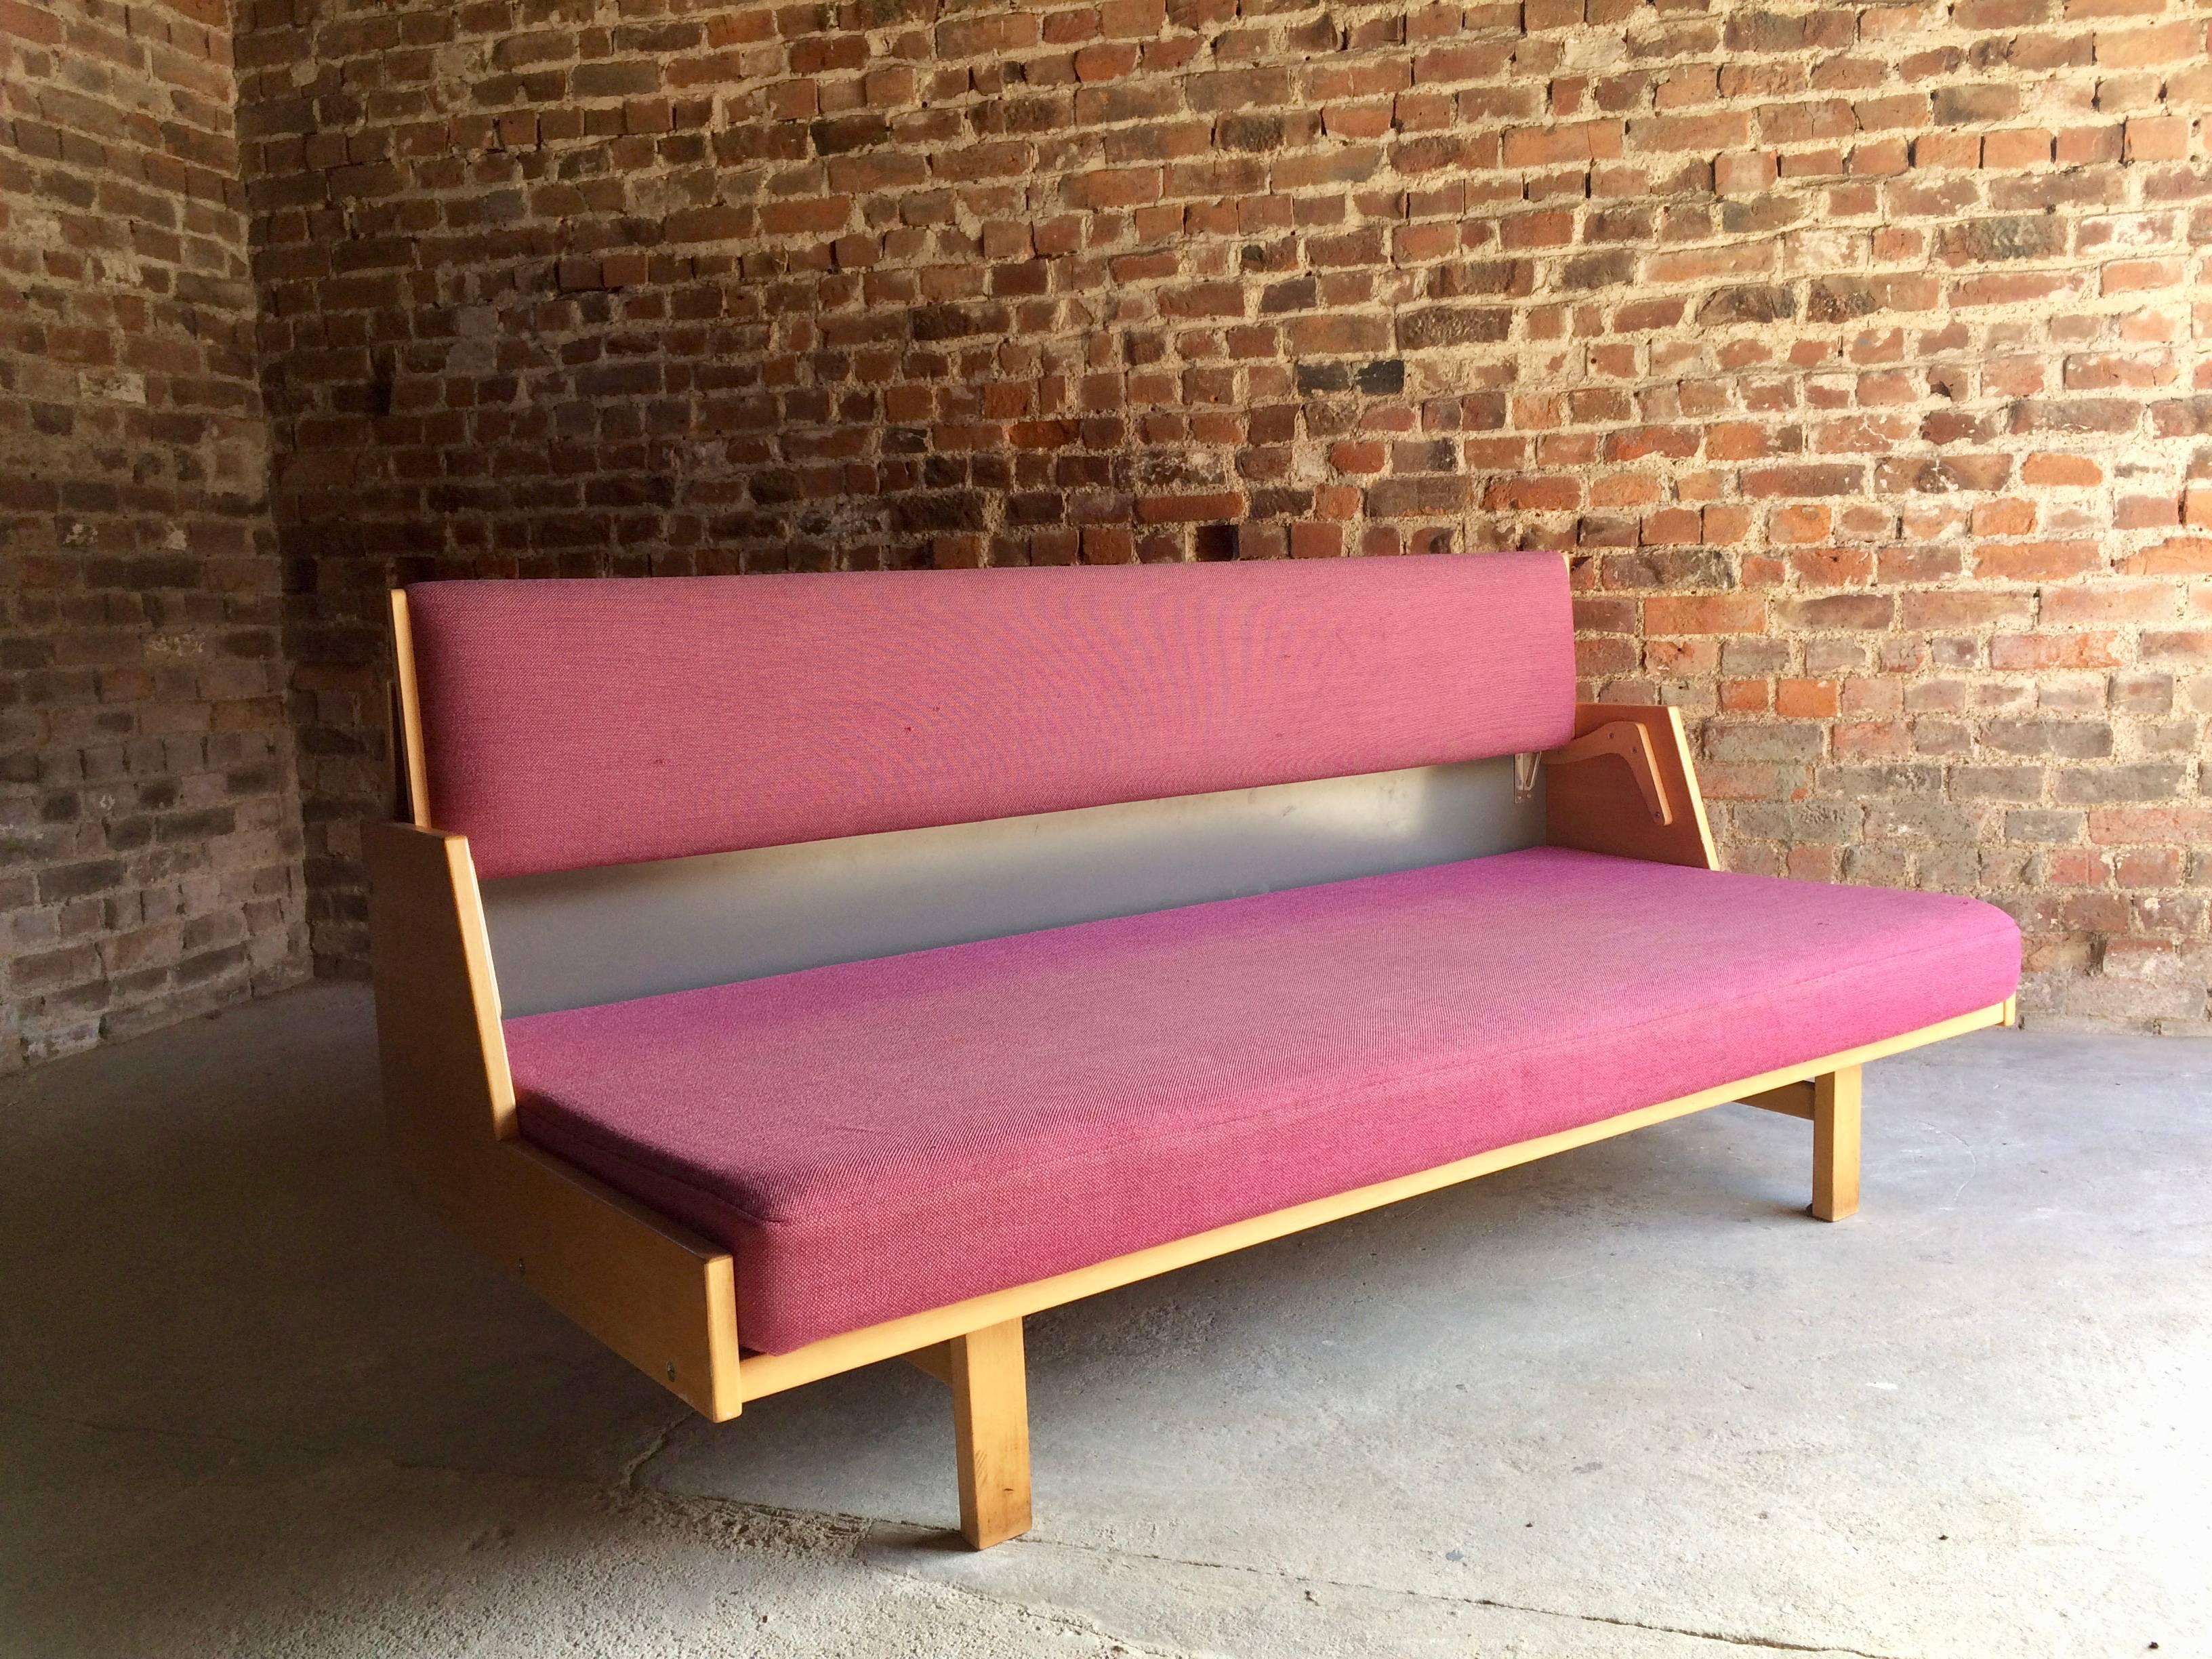 Hans J. Wegner designed in 1954 for GETAMA and produced in Denmark, a beech and upholstered daybed on square feet, the backrest lifting up to allow for use as a twin bed and to reveal a storage area, structurally sound but with wear throughout, may